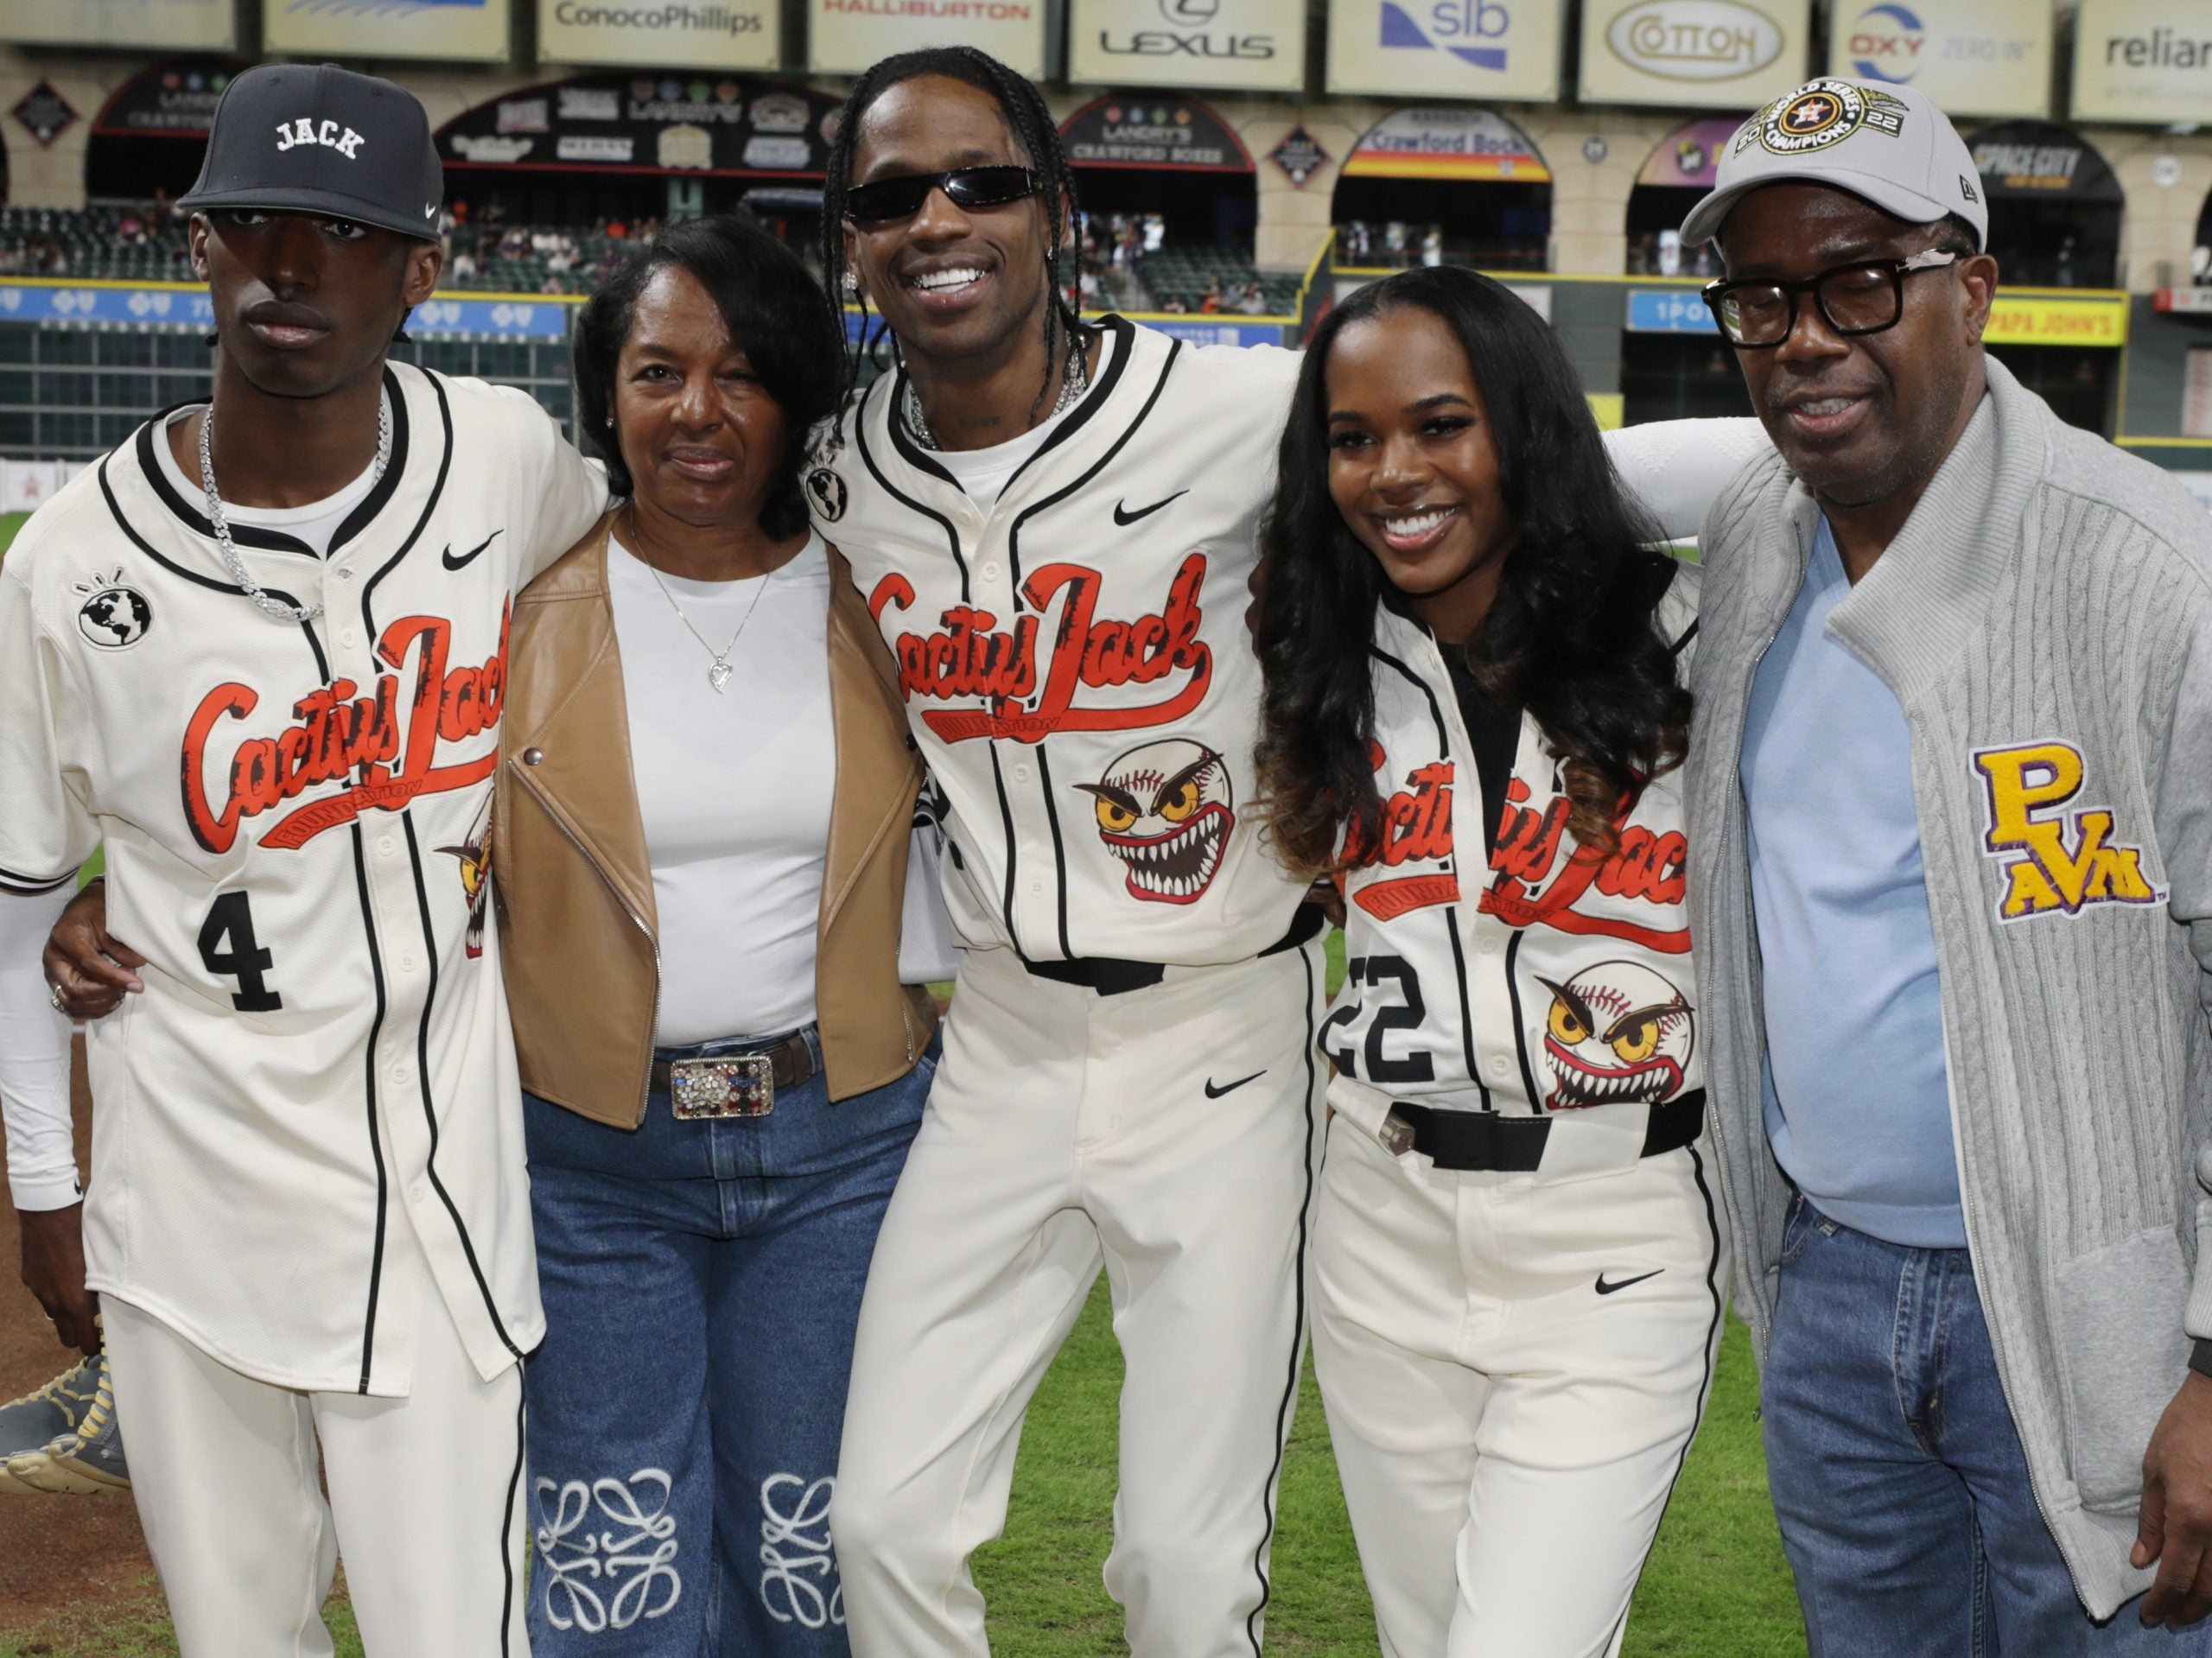 The Cactus Jack Foundation’s Celebrity Softball Game Was A Night Of Fun And Philanthropy